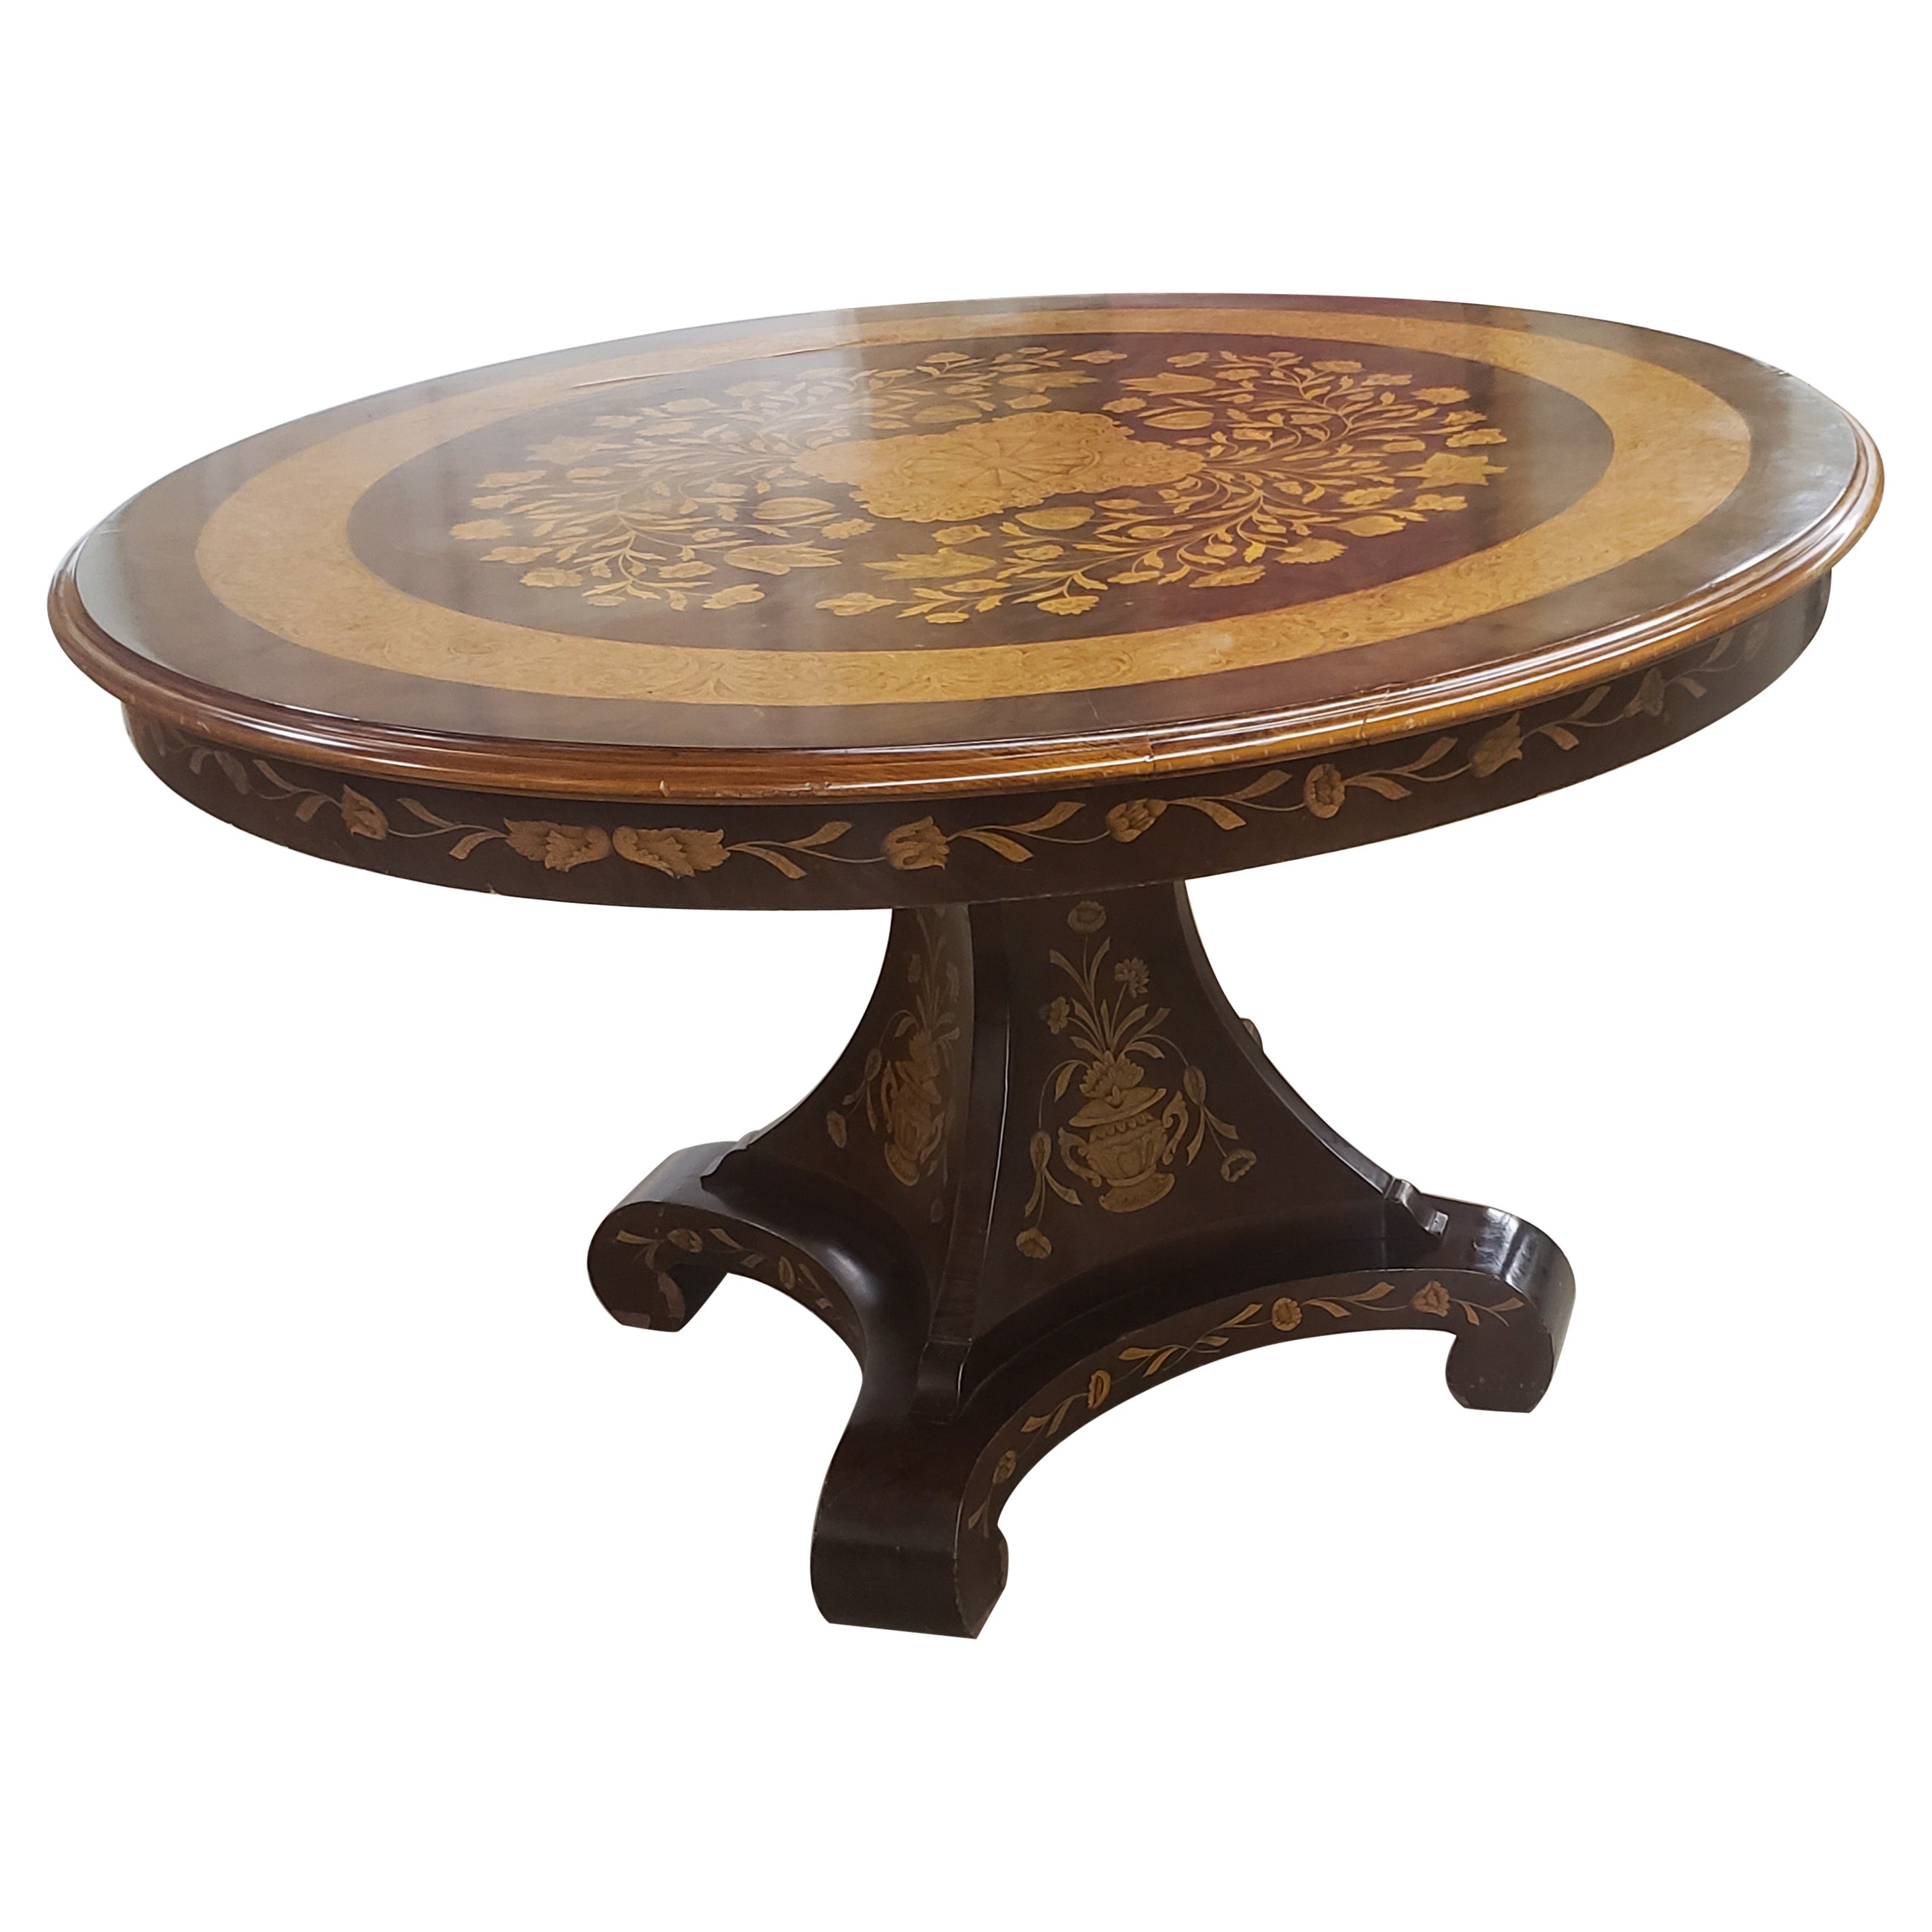 Early 20th Century Dutch Satinwood Marquetry and Mahogany Round Breakfast Table For Sale